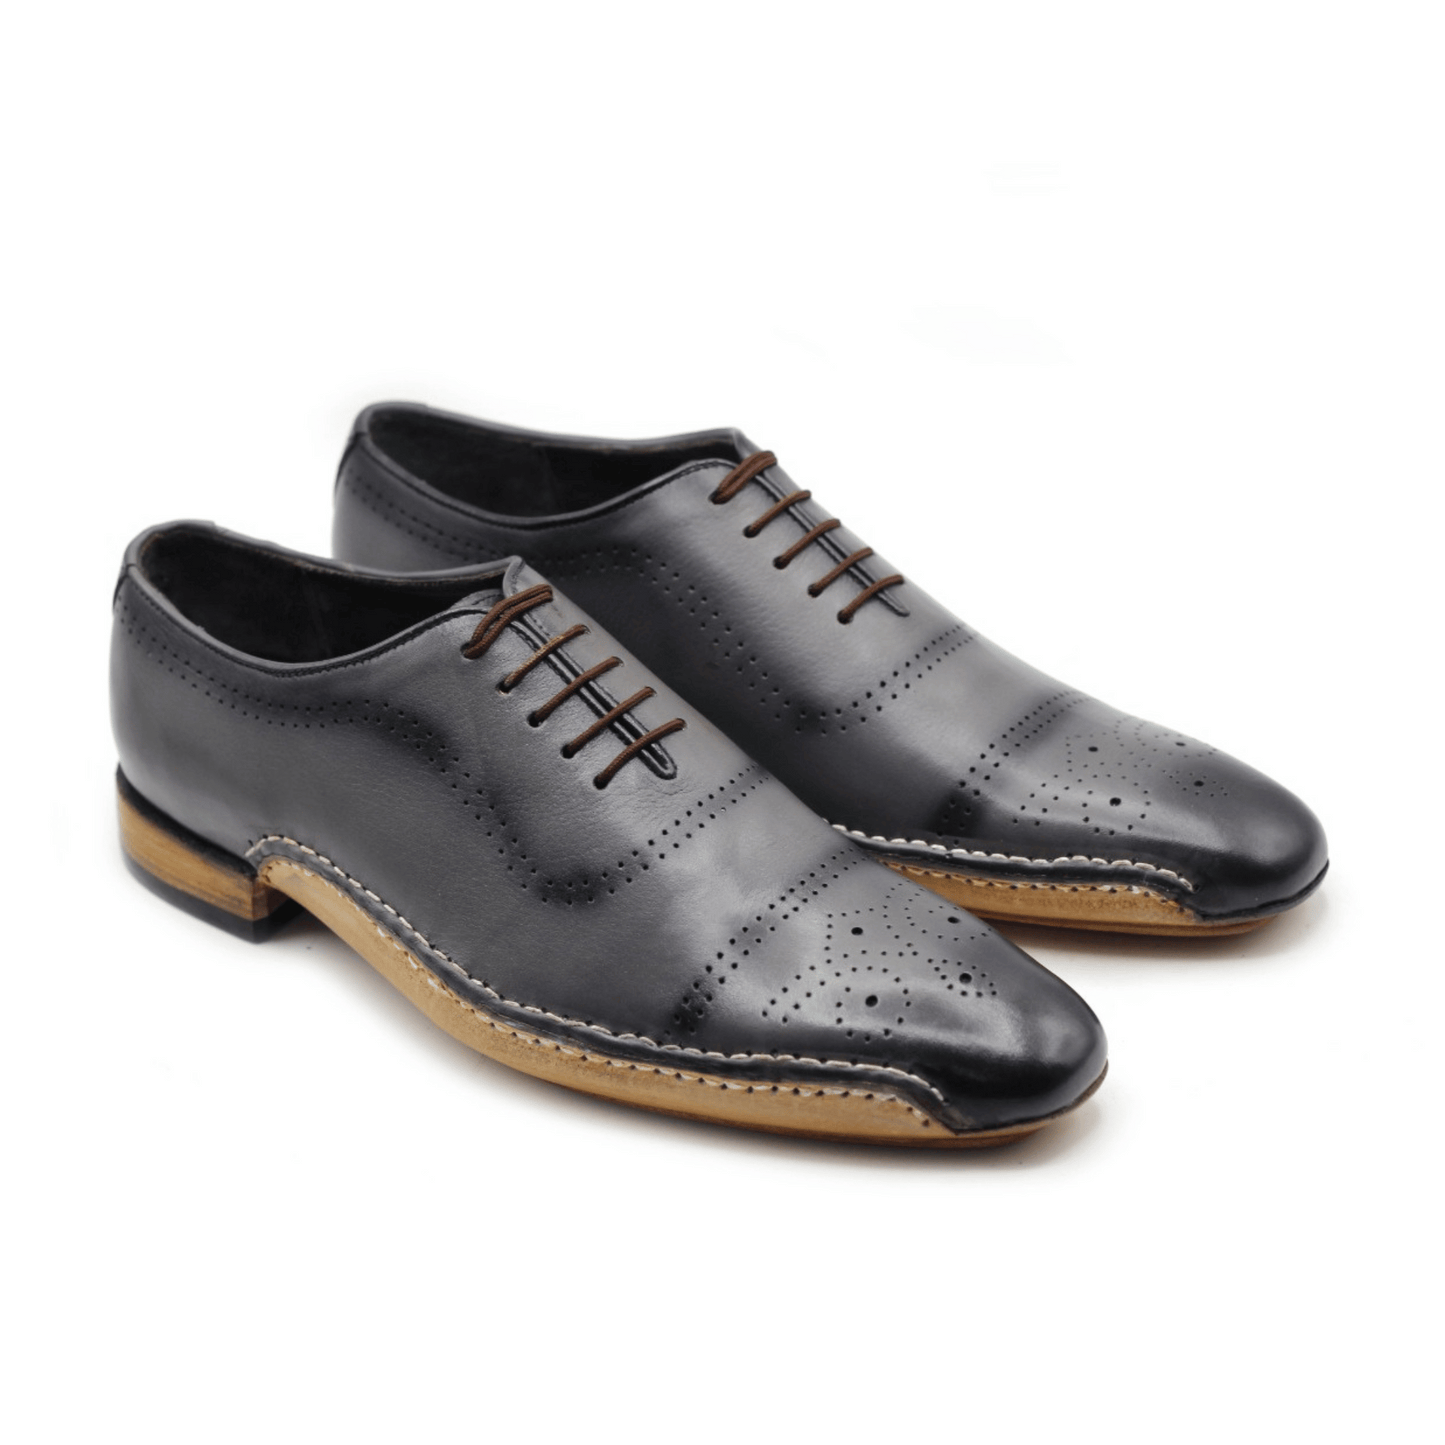 Buy Now New Custom Made Shoes Tailor made Handmade Bespoke Custom Design Genuine Black Leather Oxford Lace Up Unique Design Shoes For Mens